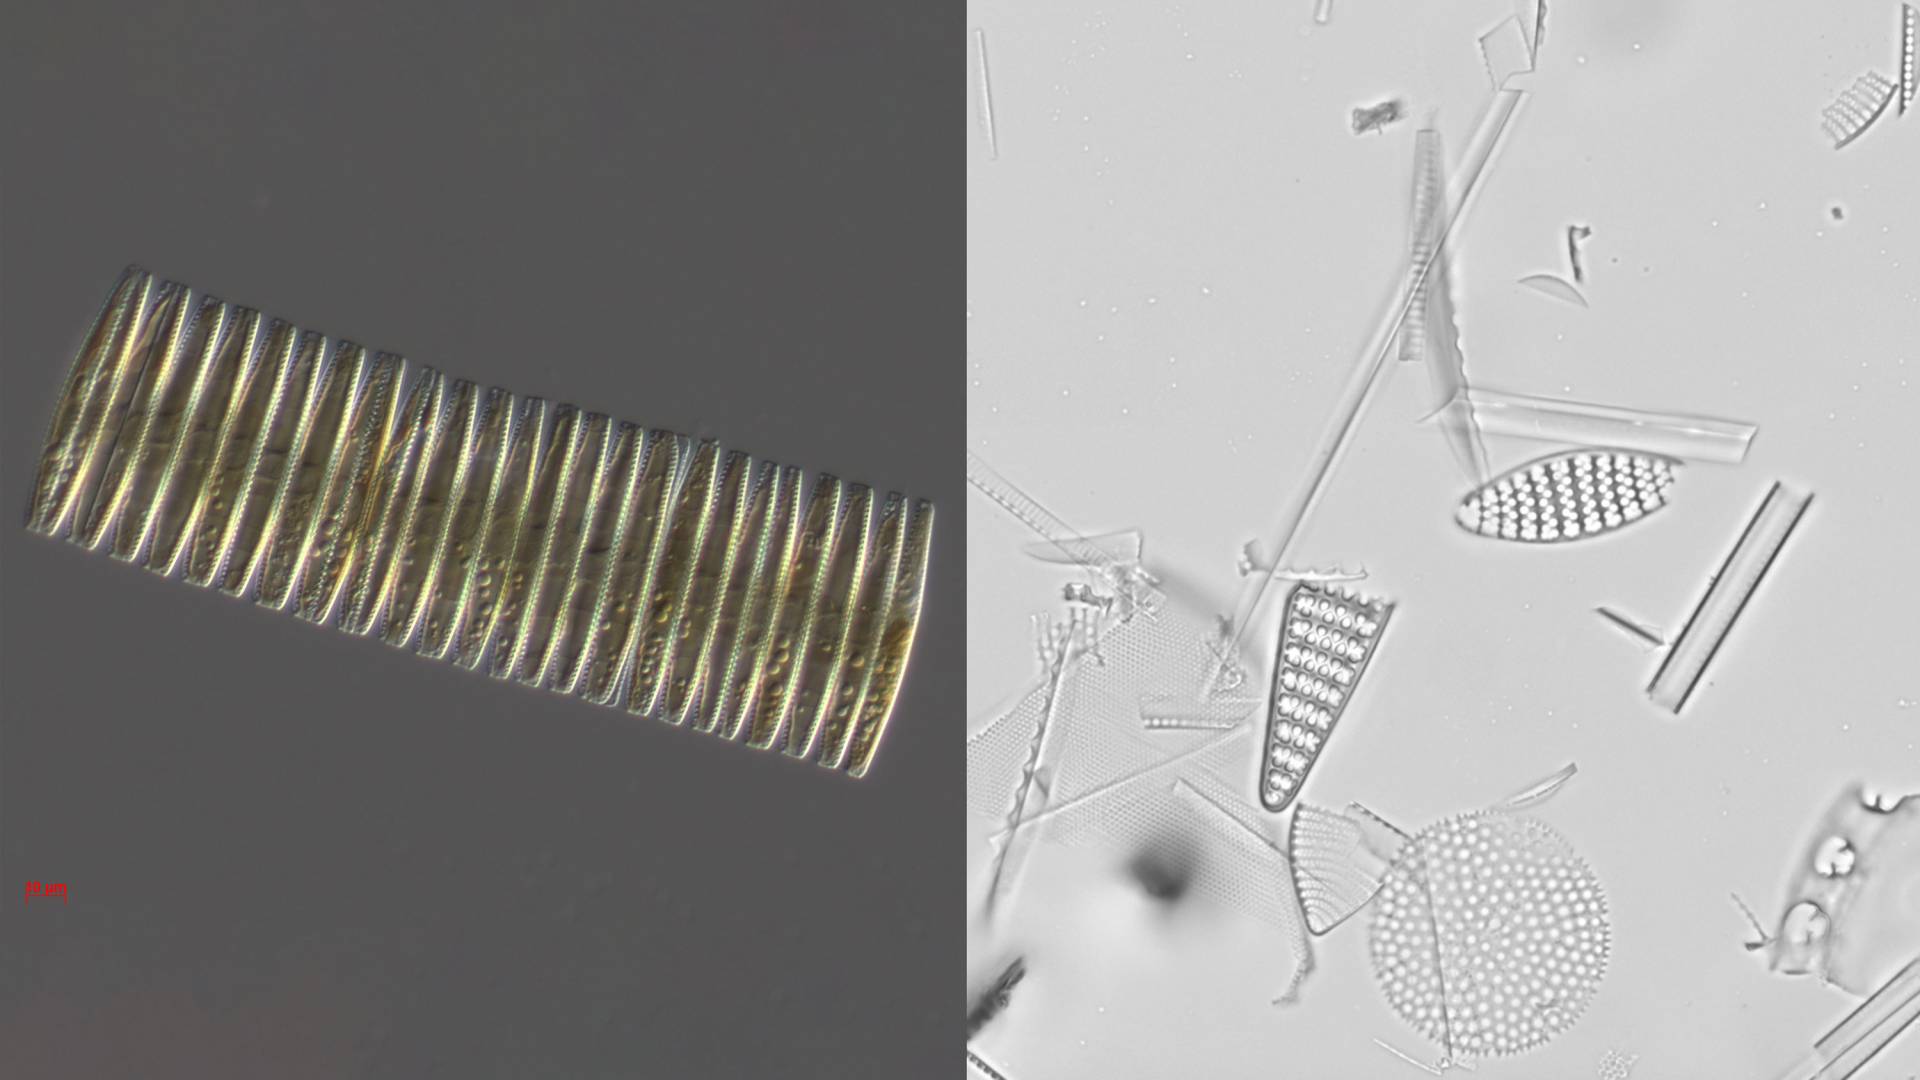 live cylindrical diatom and shapes of fossilized diatoms